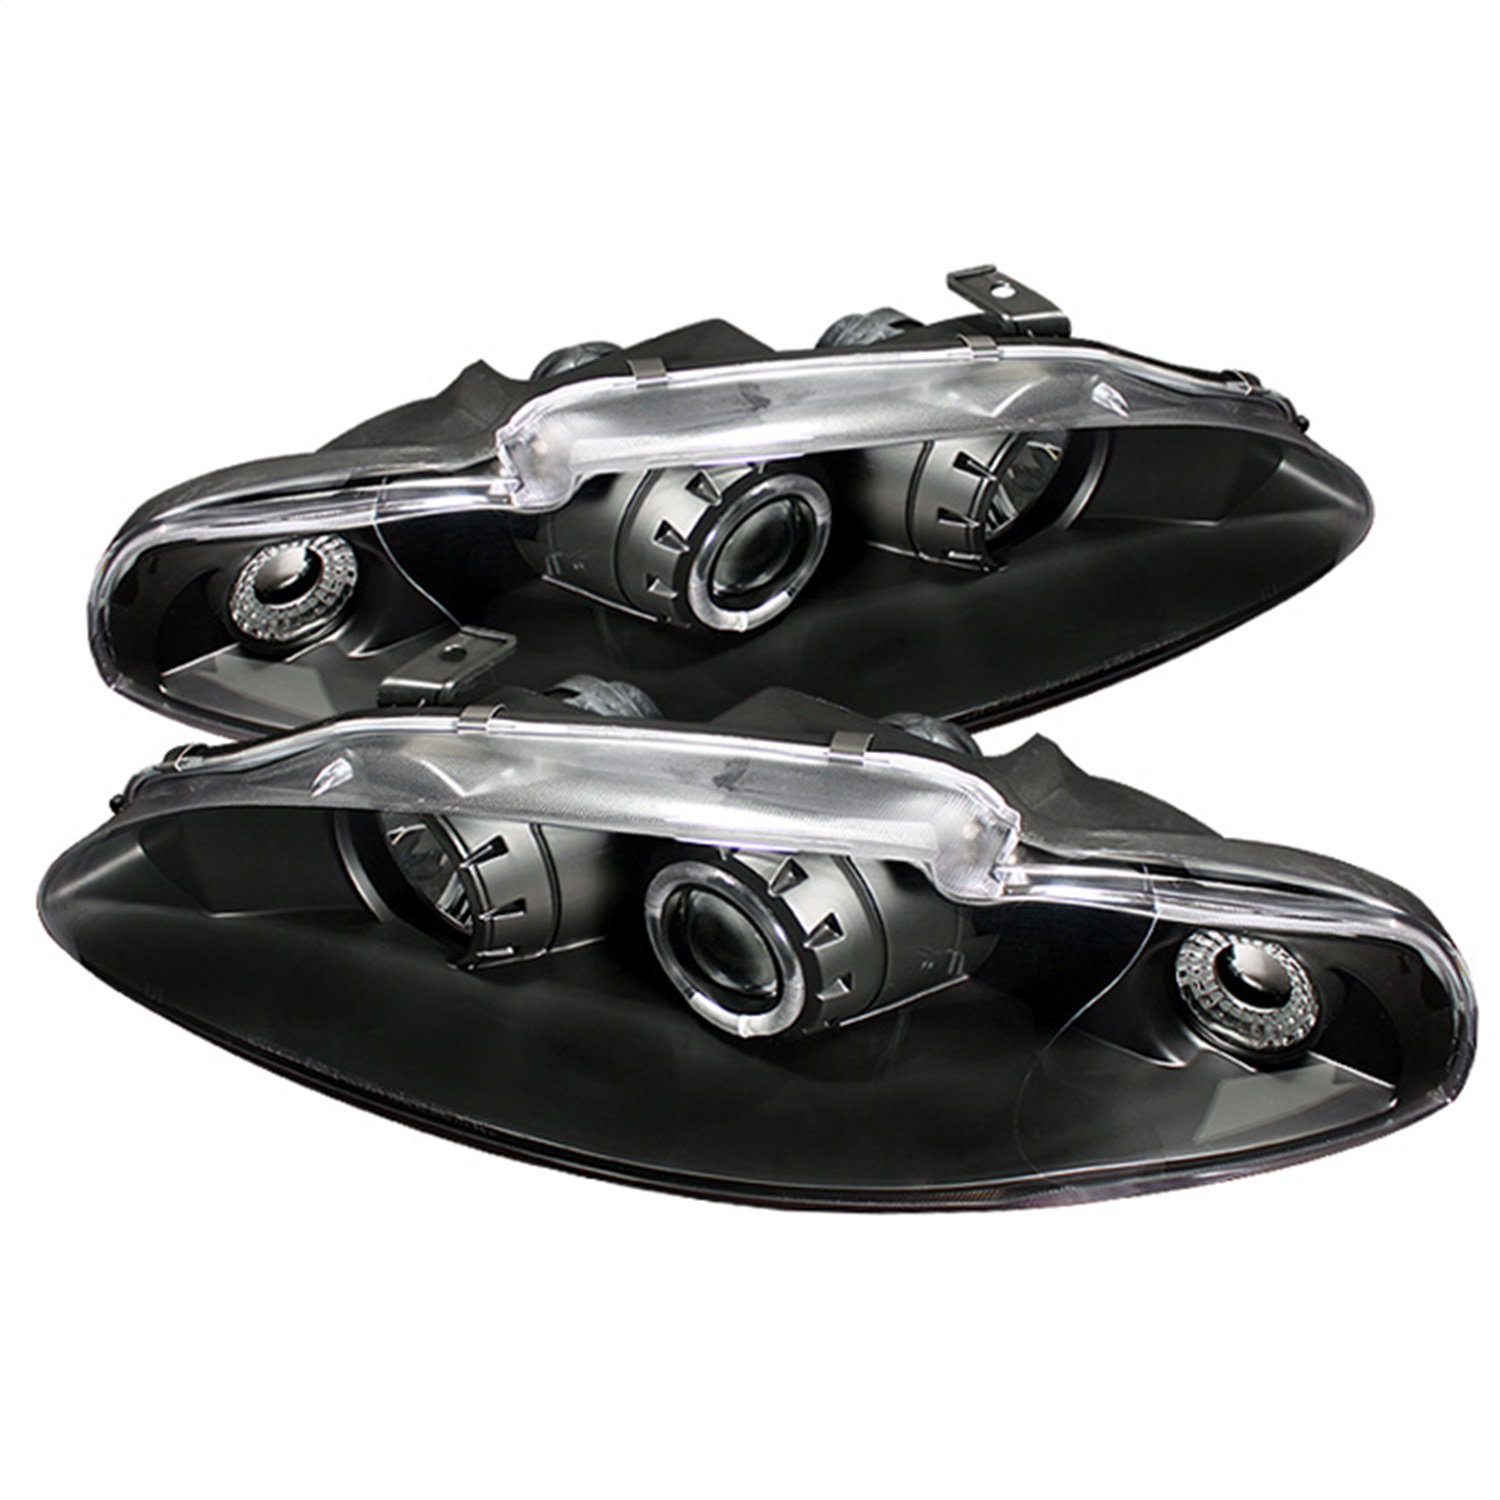 Spyder Auto 5011428 Halo Projector Headlights Fits 95-96 Eclipse